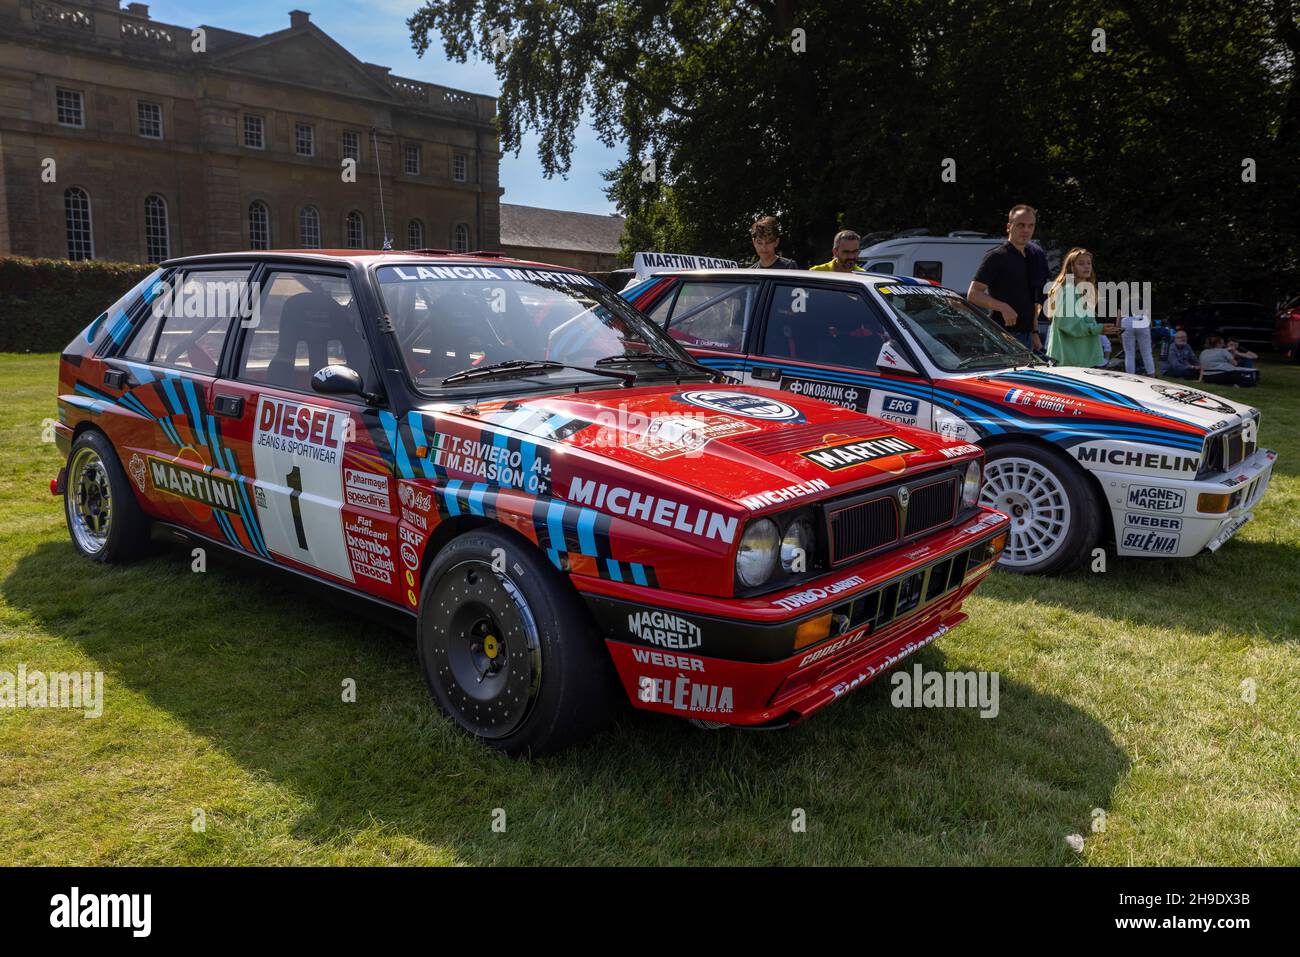 Lancia Delta HF Integrale 16V 1989 Sanremo Rally car, on display at the Concours d’Elegance motor show held at Blenheim Palace on the 5 September 2021 Stock Photo